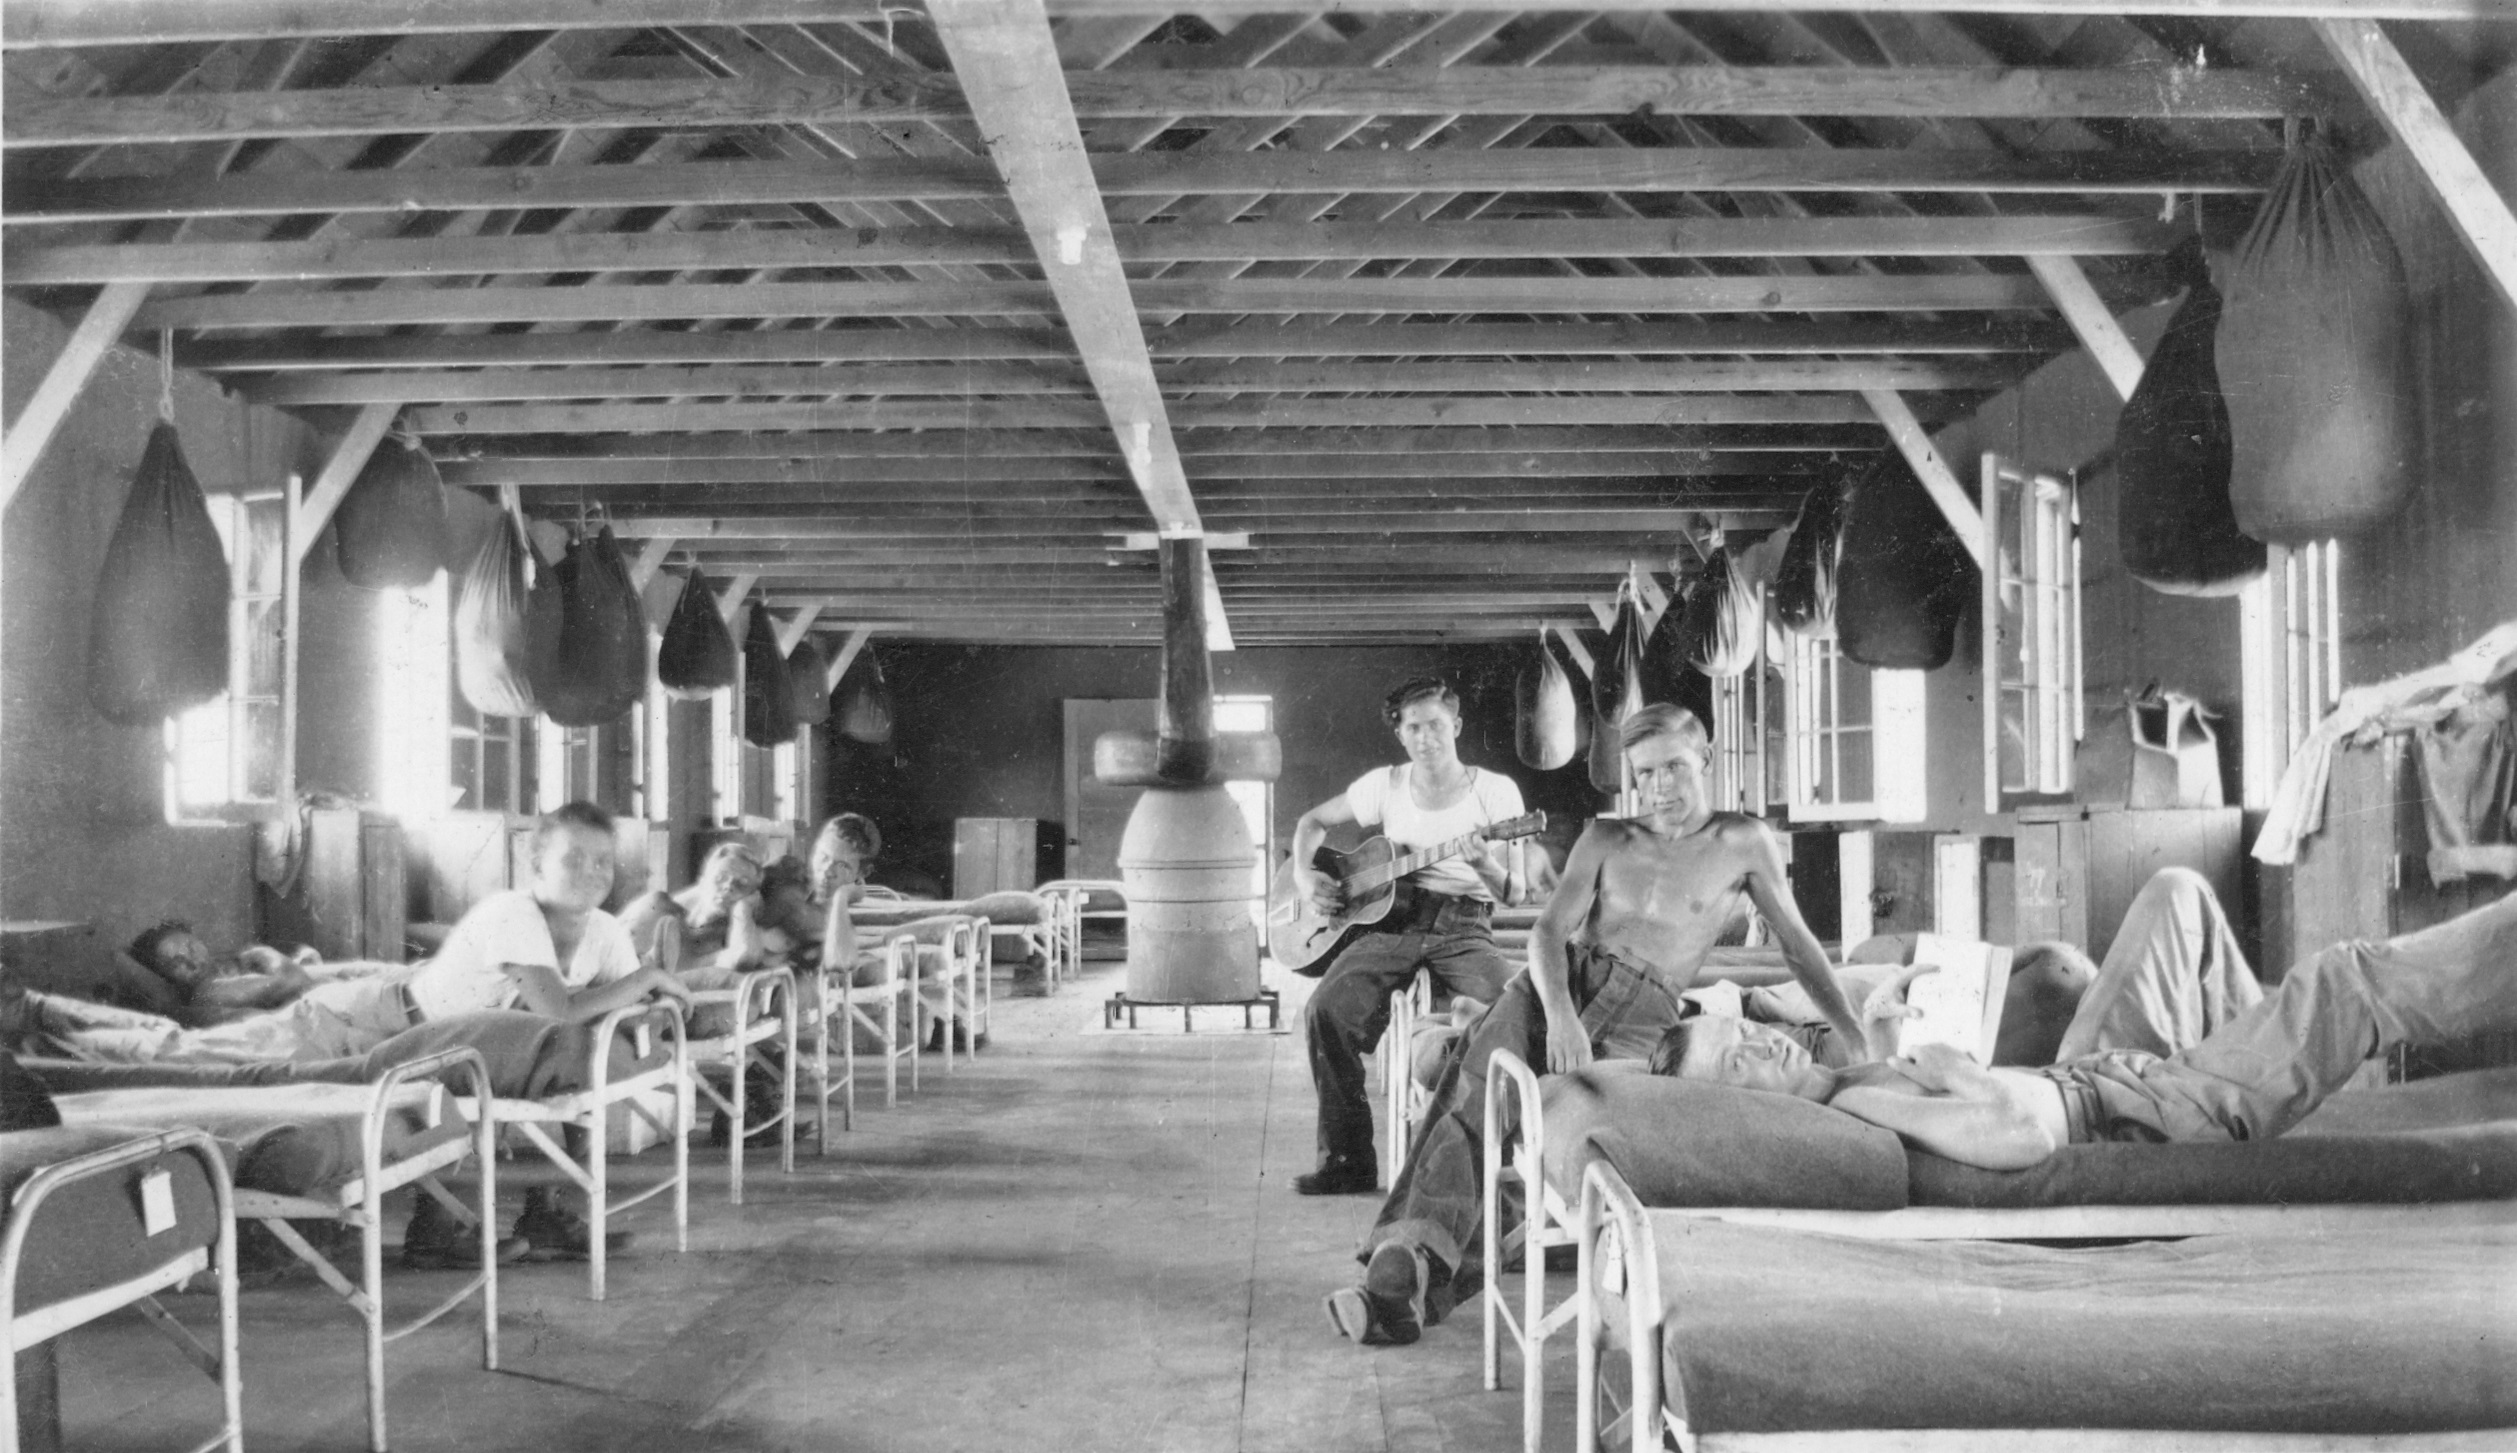 CCC enrollees in their barracks at the Leeds CCC Camp